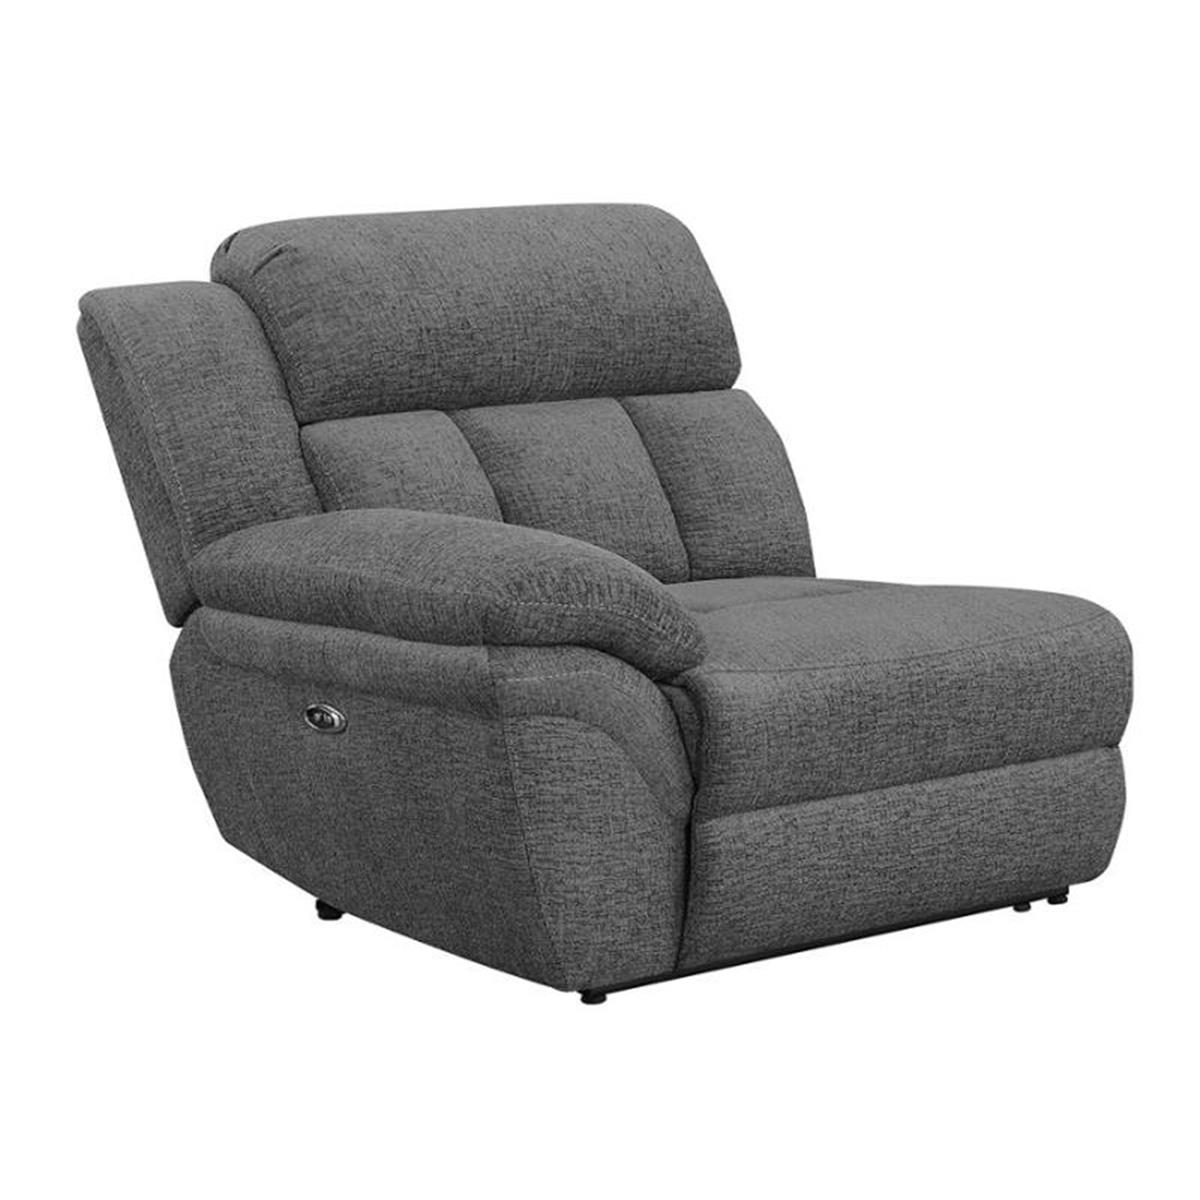 Picture of Coaster Furniture 609540LRP 39.75 x 36.5 x 38.25 in. Laf Power Recliner